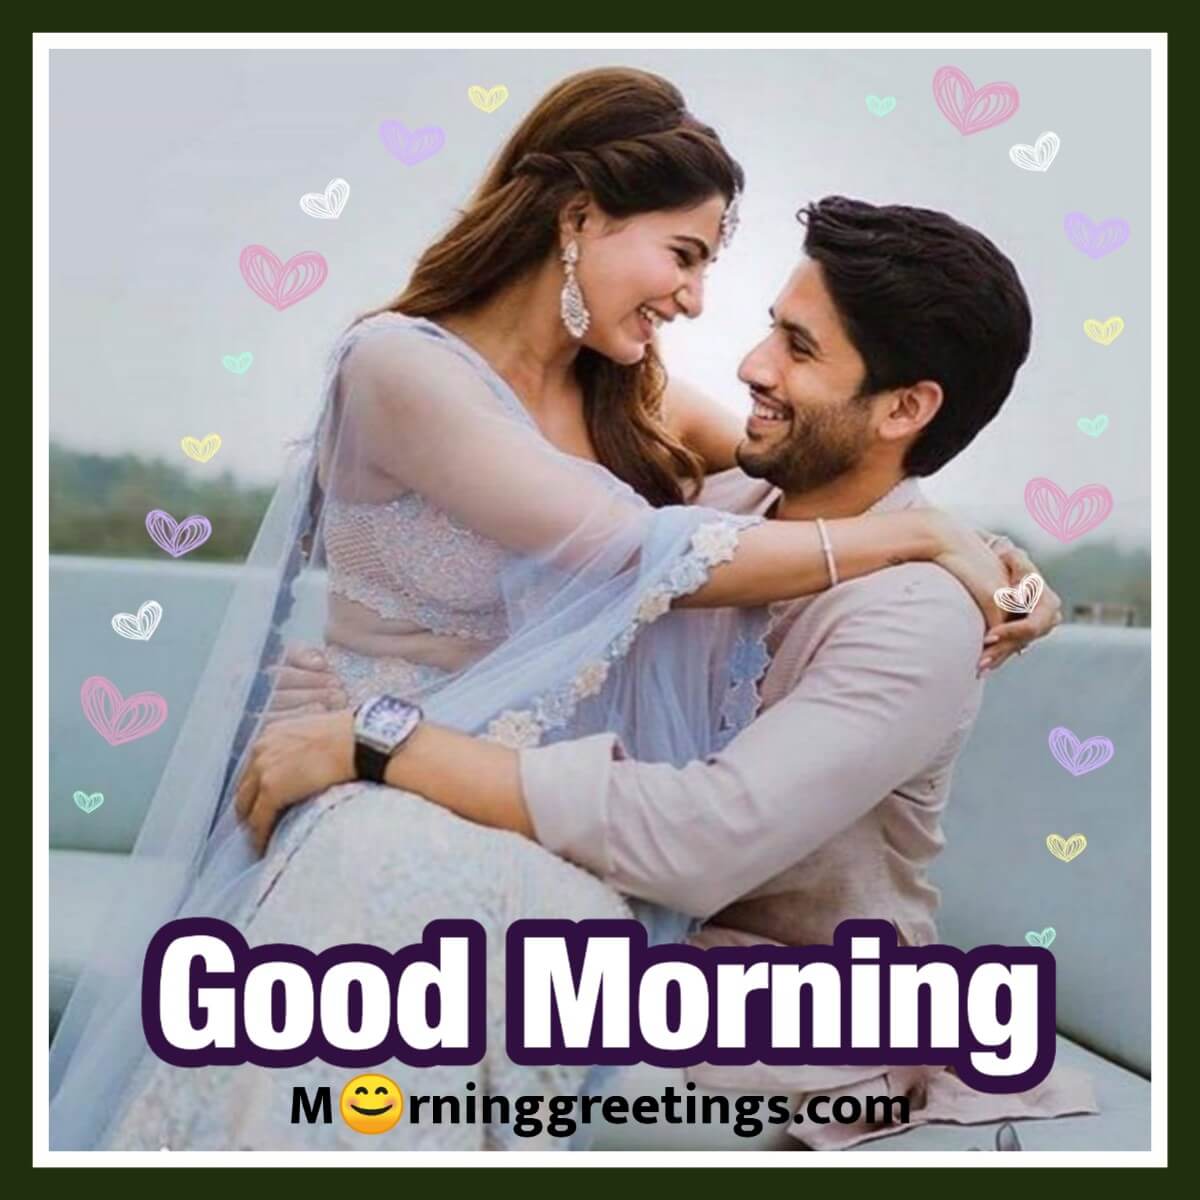 Good Morning Hug Quotes And Messages Cards Morning Greetings Morning Wishes